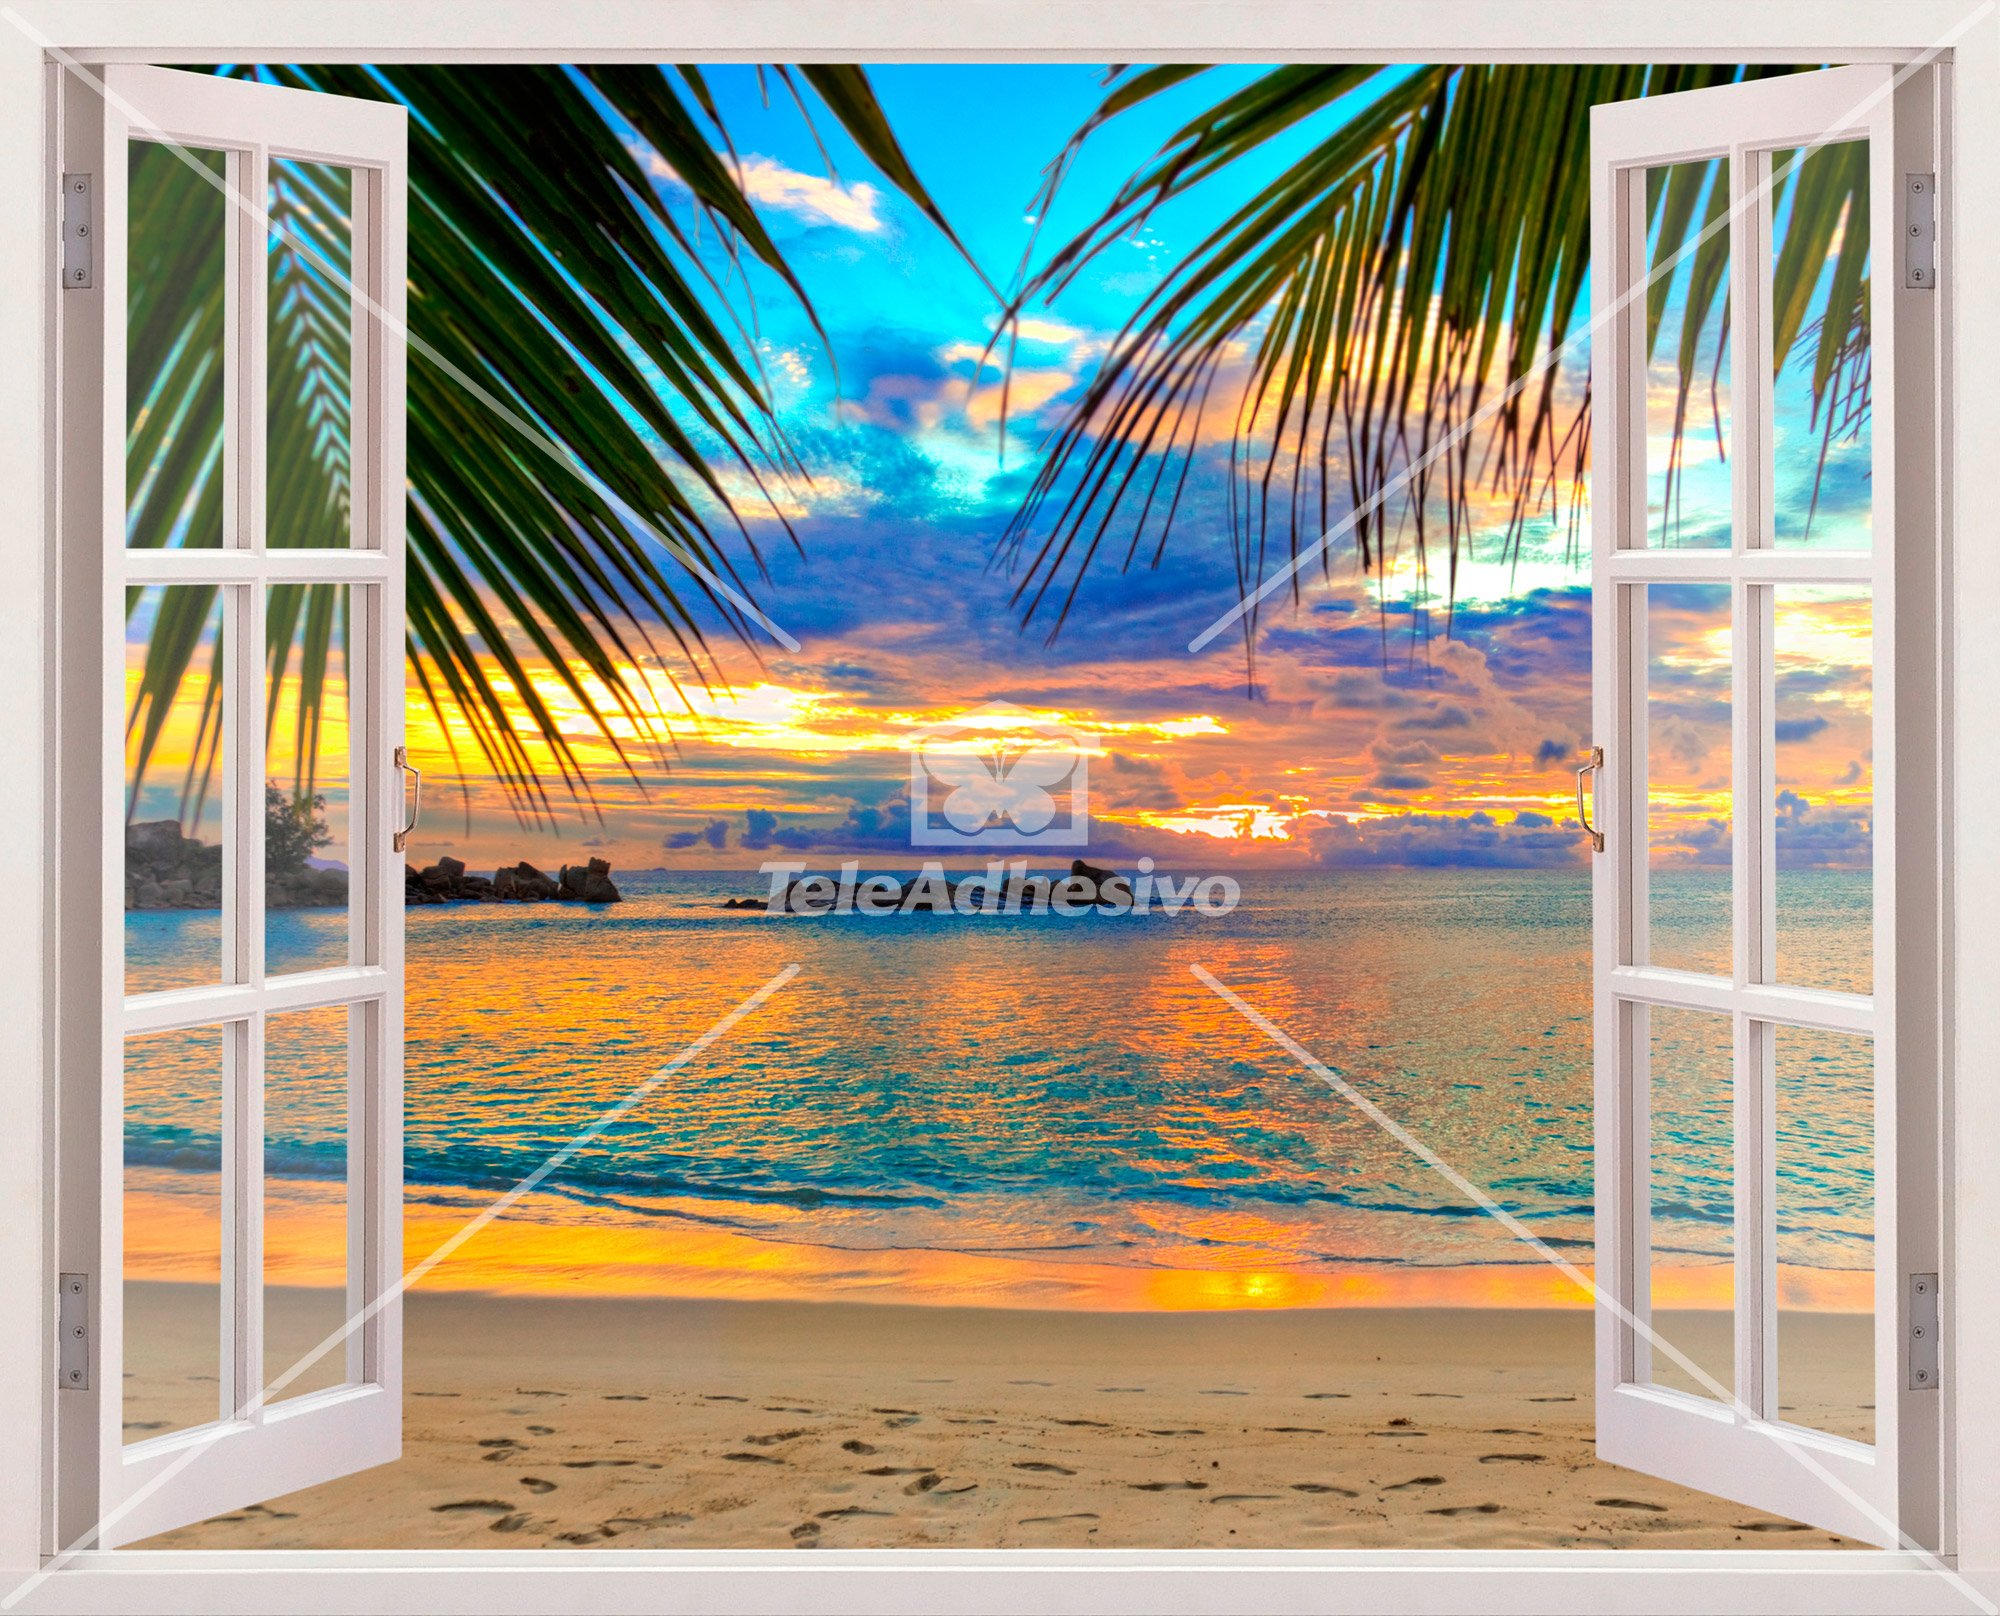 Wall Stickers: Sunset on the beach